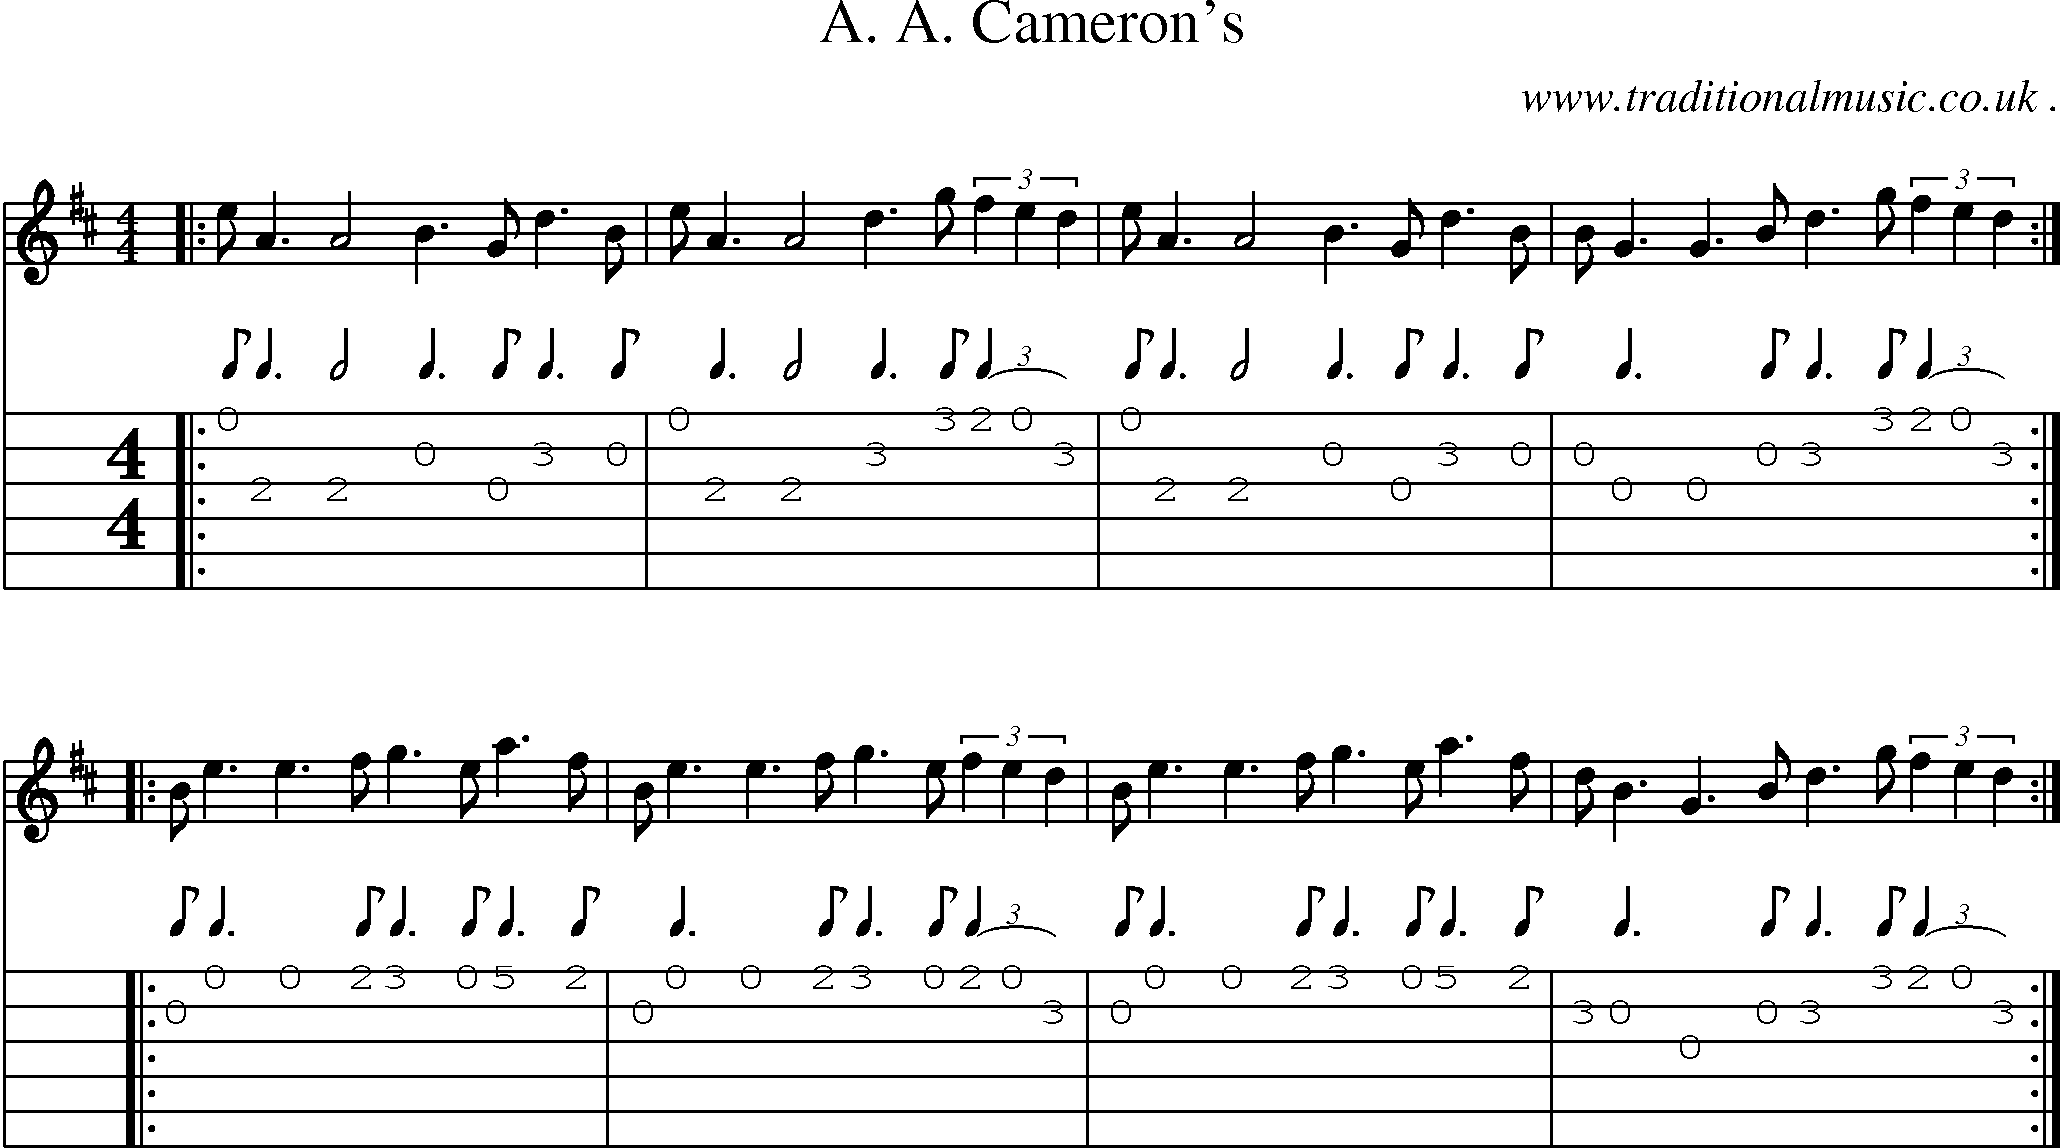 Sheet-music  score, Chords and Guitar Tabs for A A Camerons